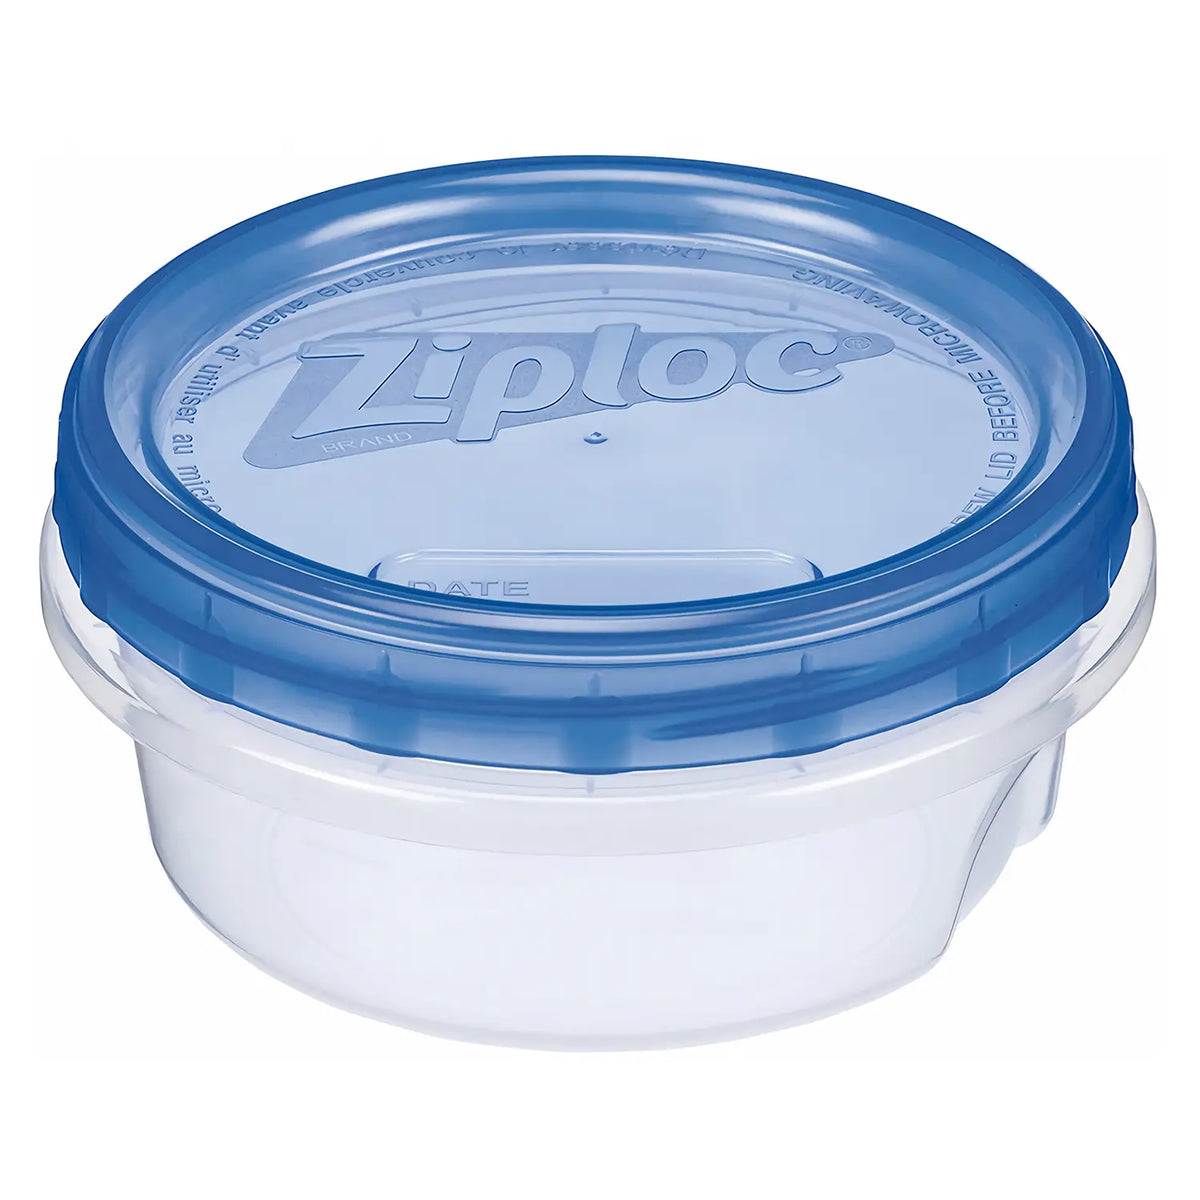 Ziploc Twist 'N Loc Containers & Lids, Round, Small, 3 sets